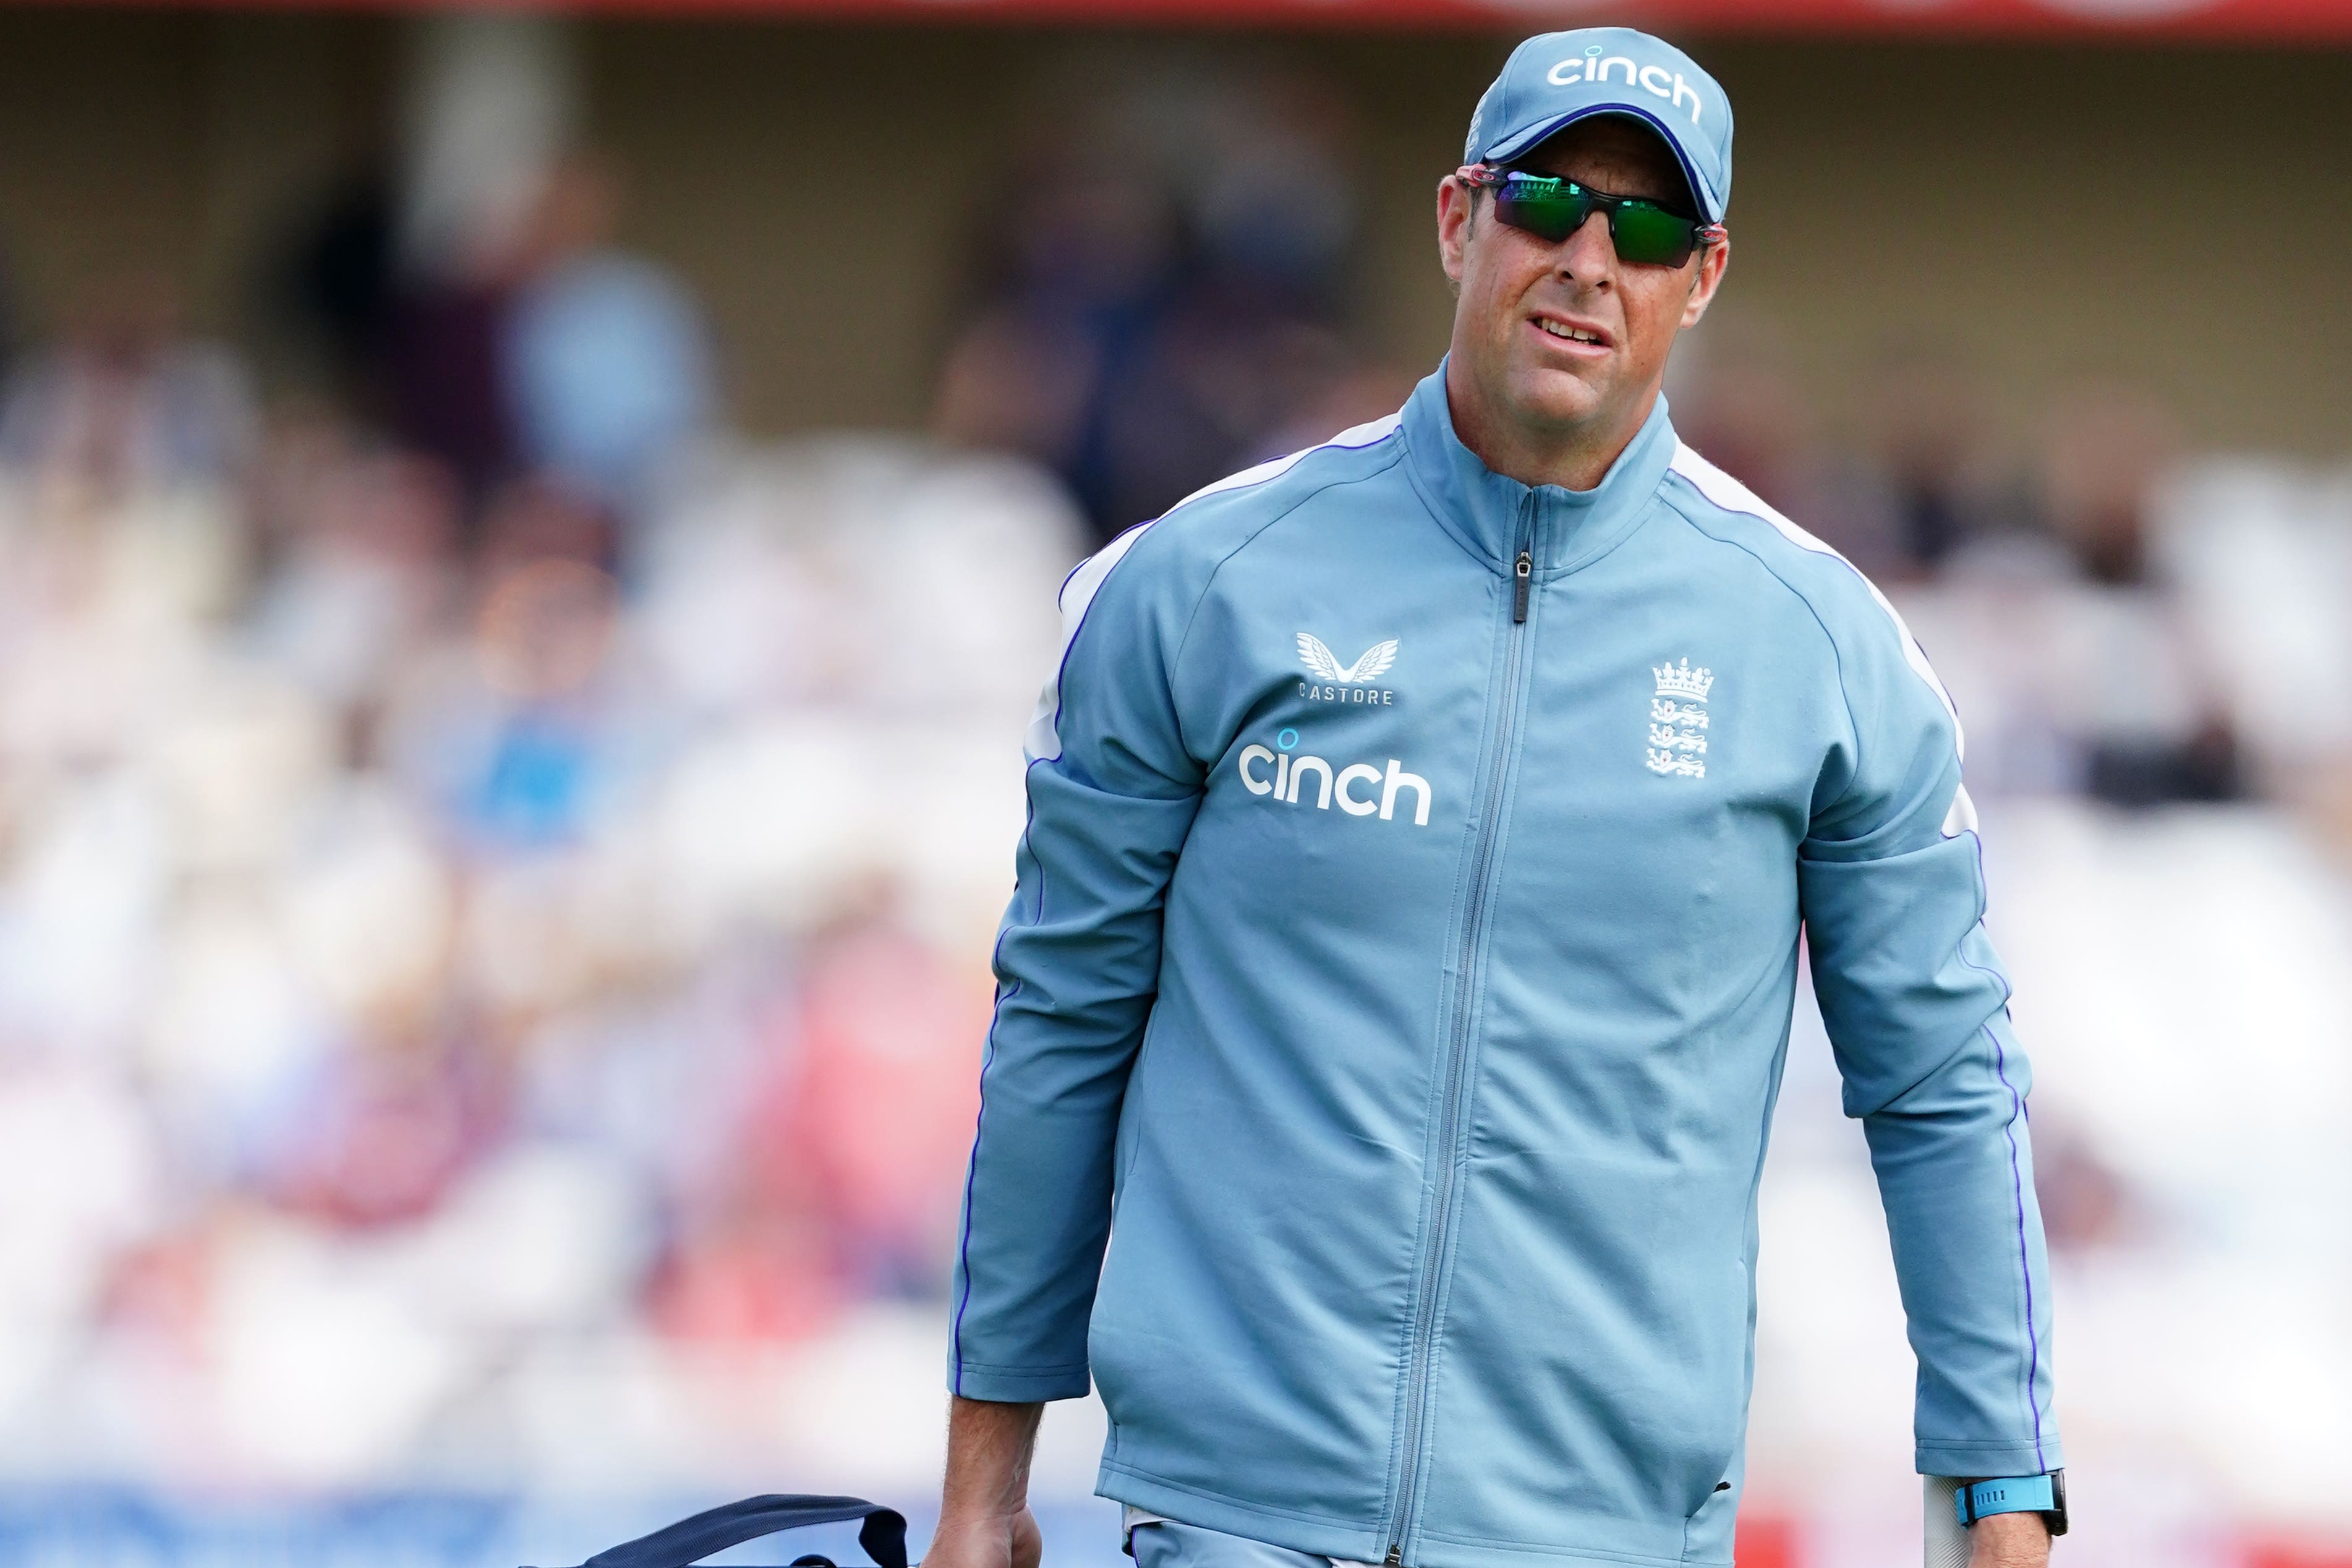 Marcus Trescothick wishes the Ashes started next week (Mike Egerton/PA)